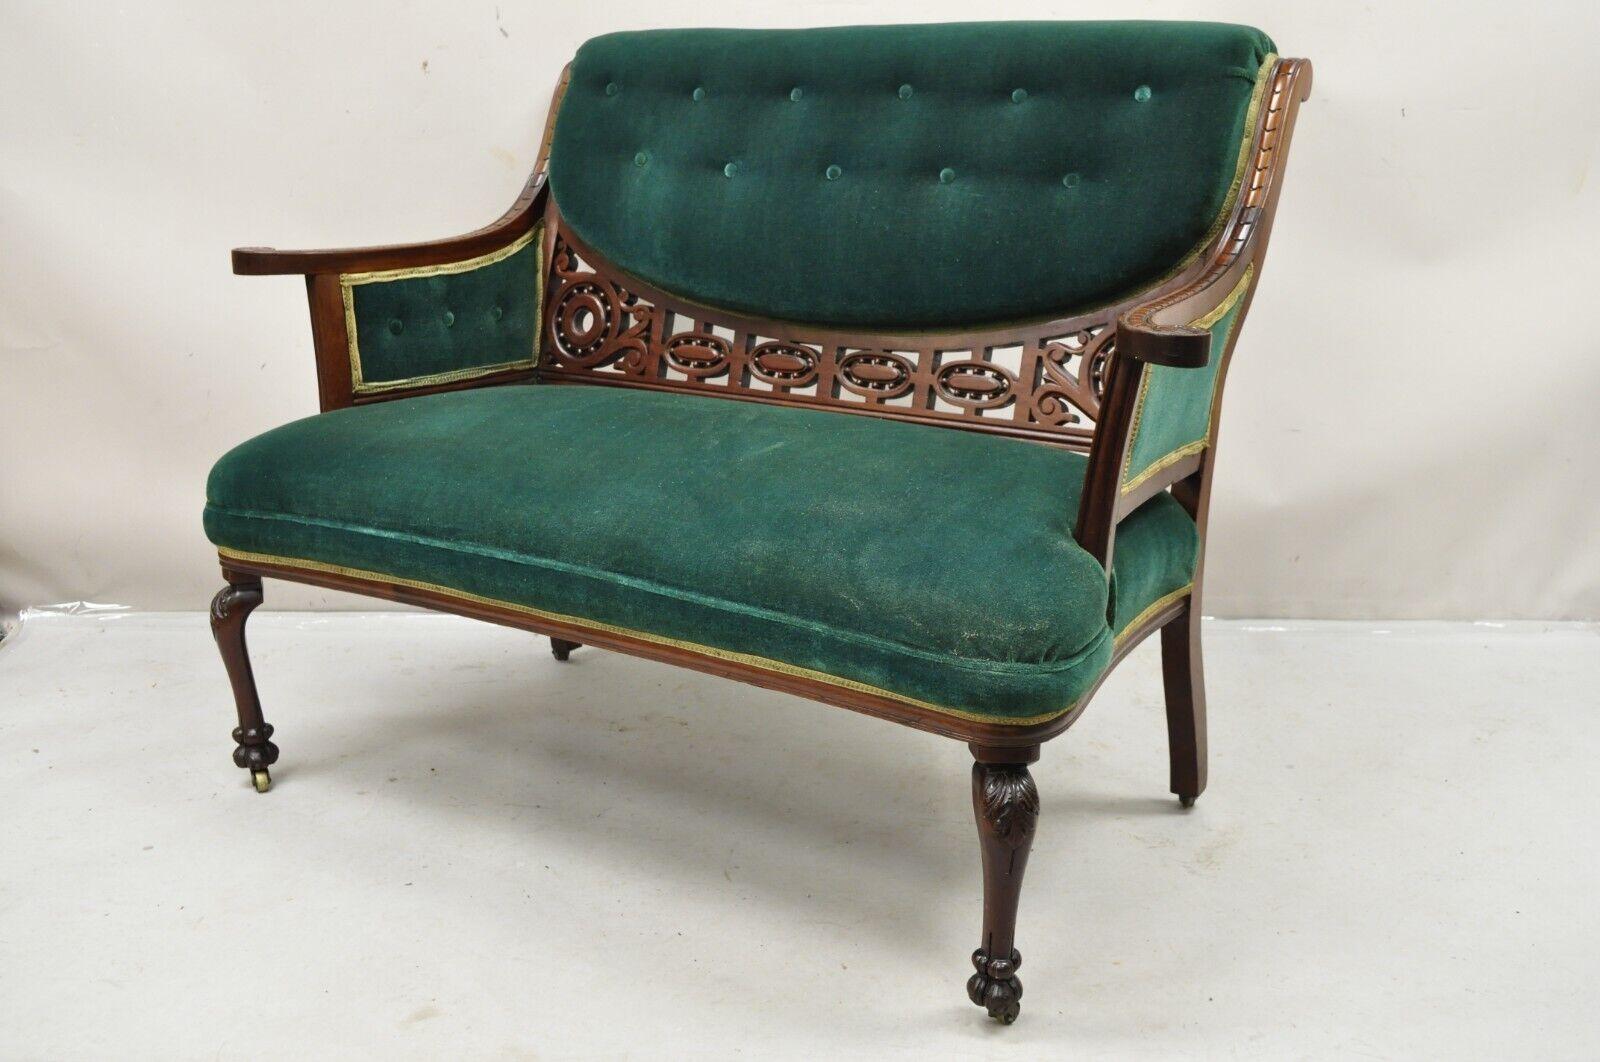 Antique Victorian Green Mohair Fretwork Carved Mahogany Parlor Loveseat Settee. Circa  Late 19th Century.
Measurements: 35